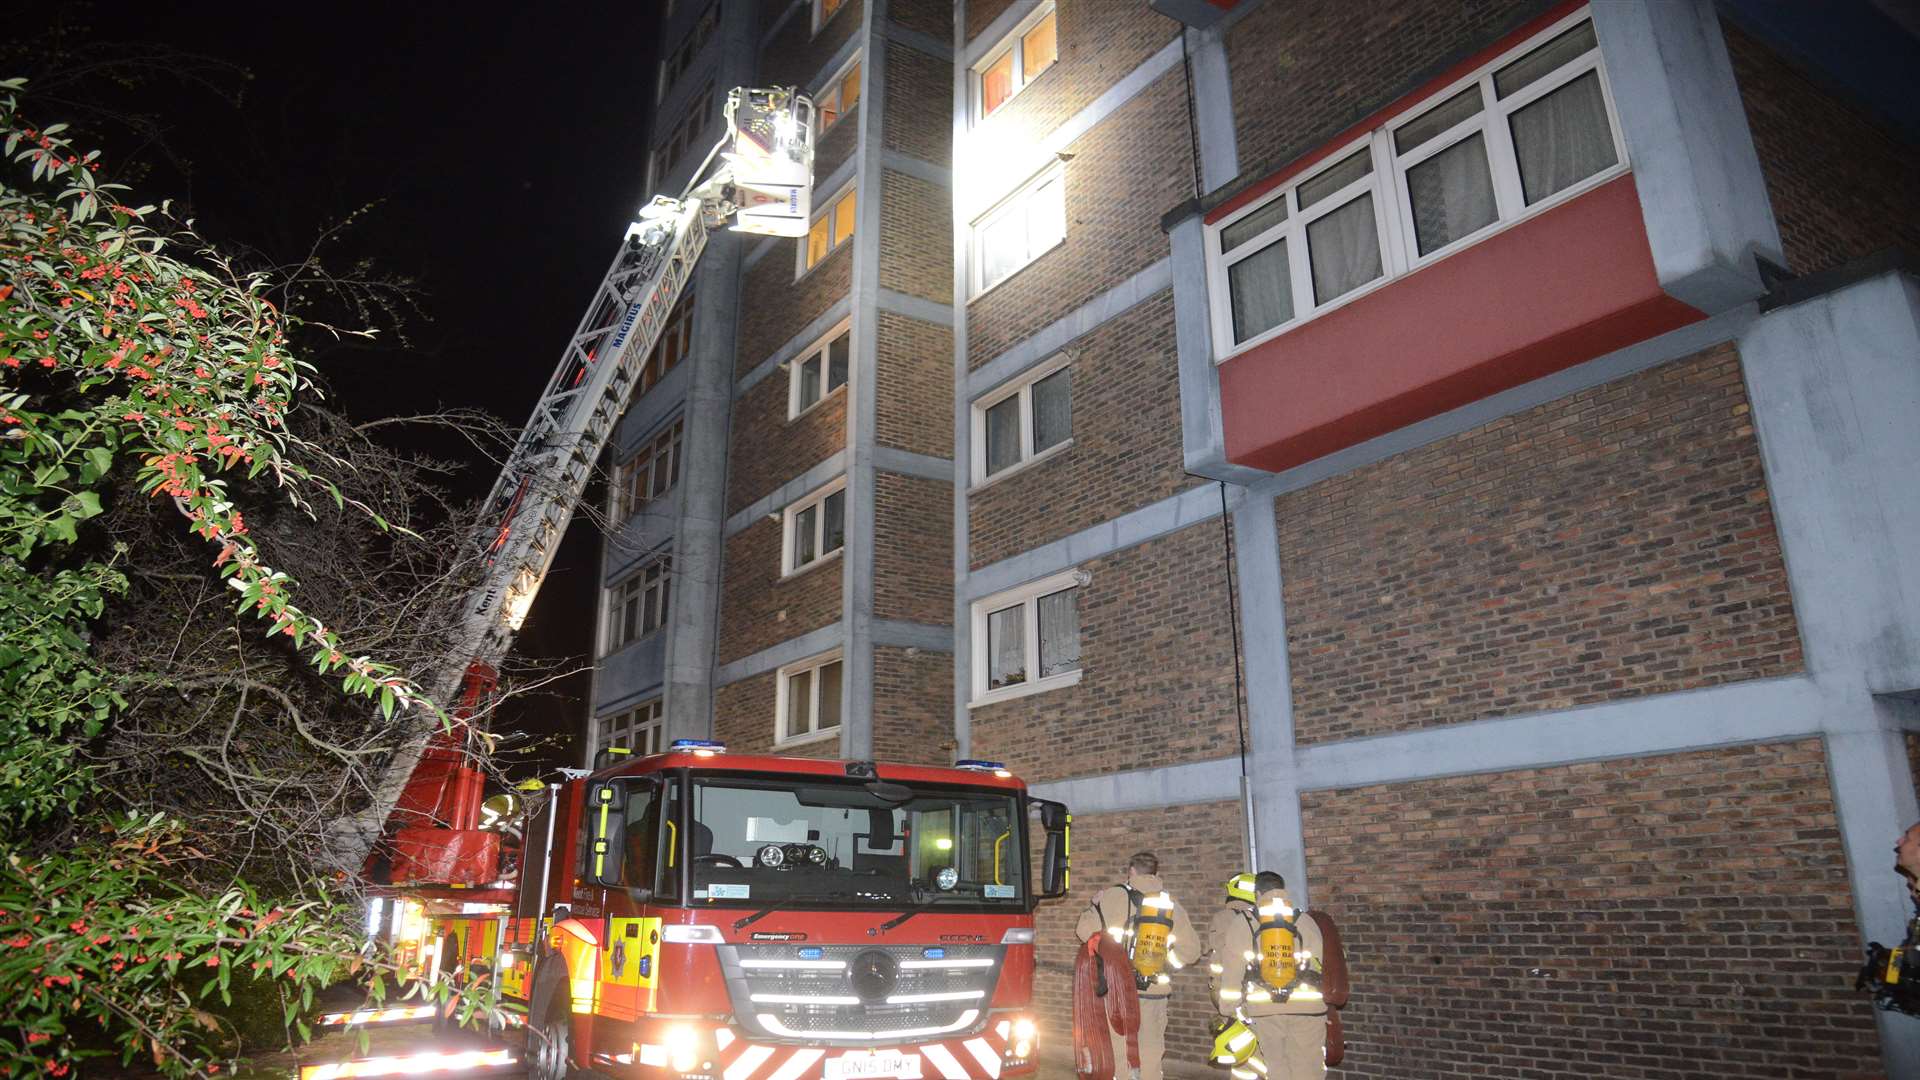 The height ladder in action fire fighting exercise Melville Court.